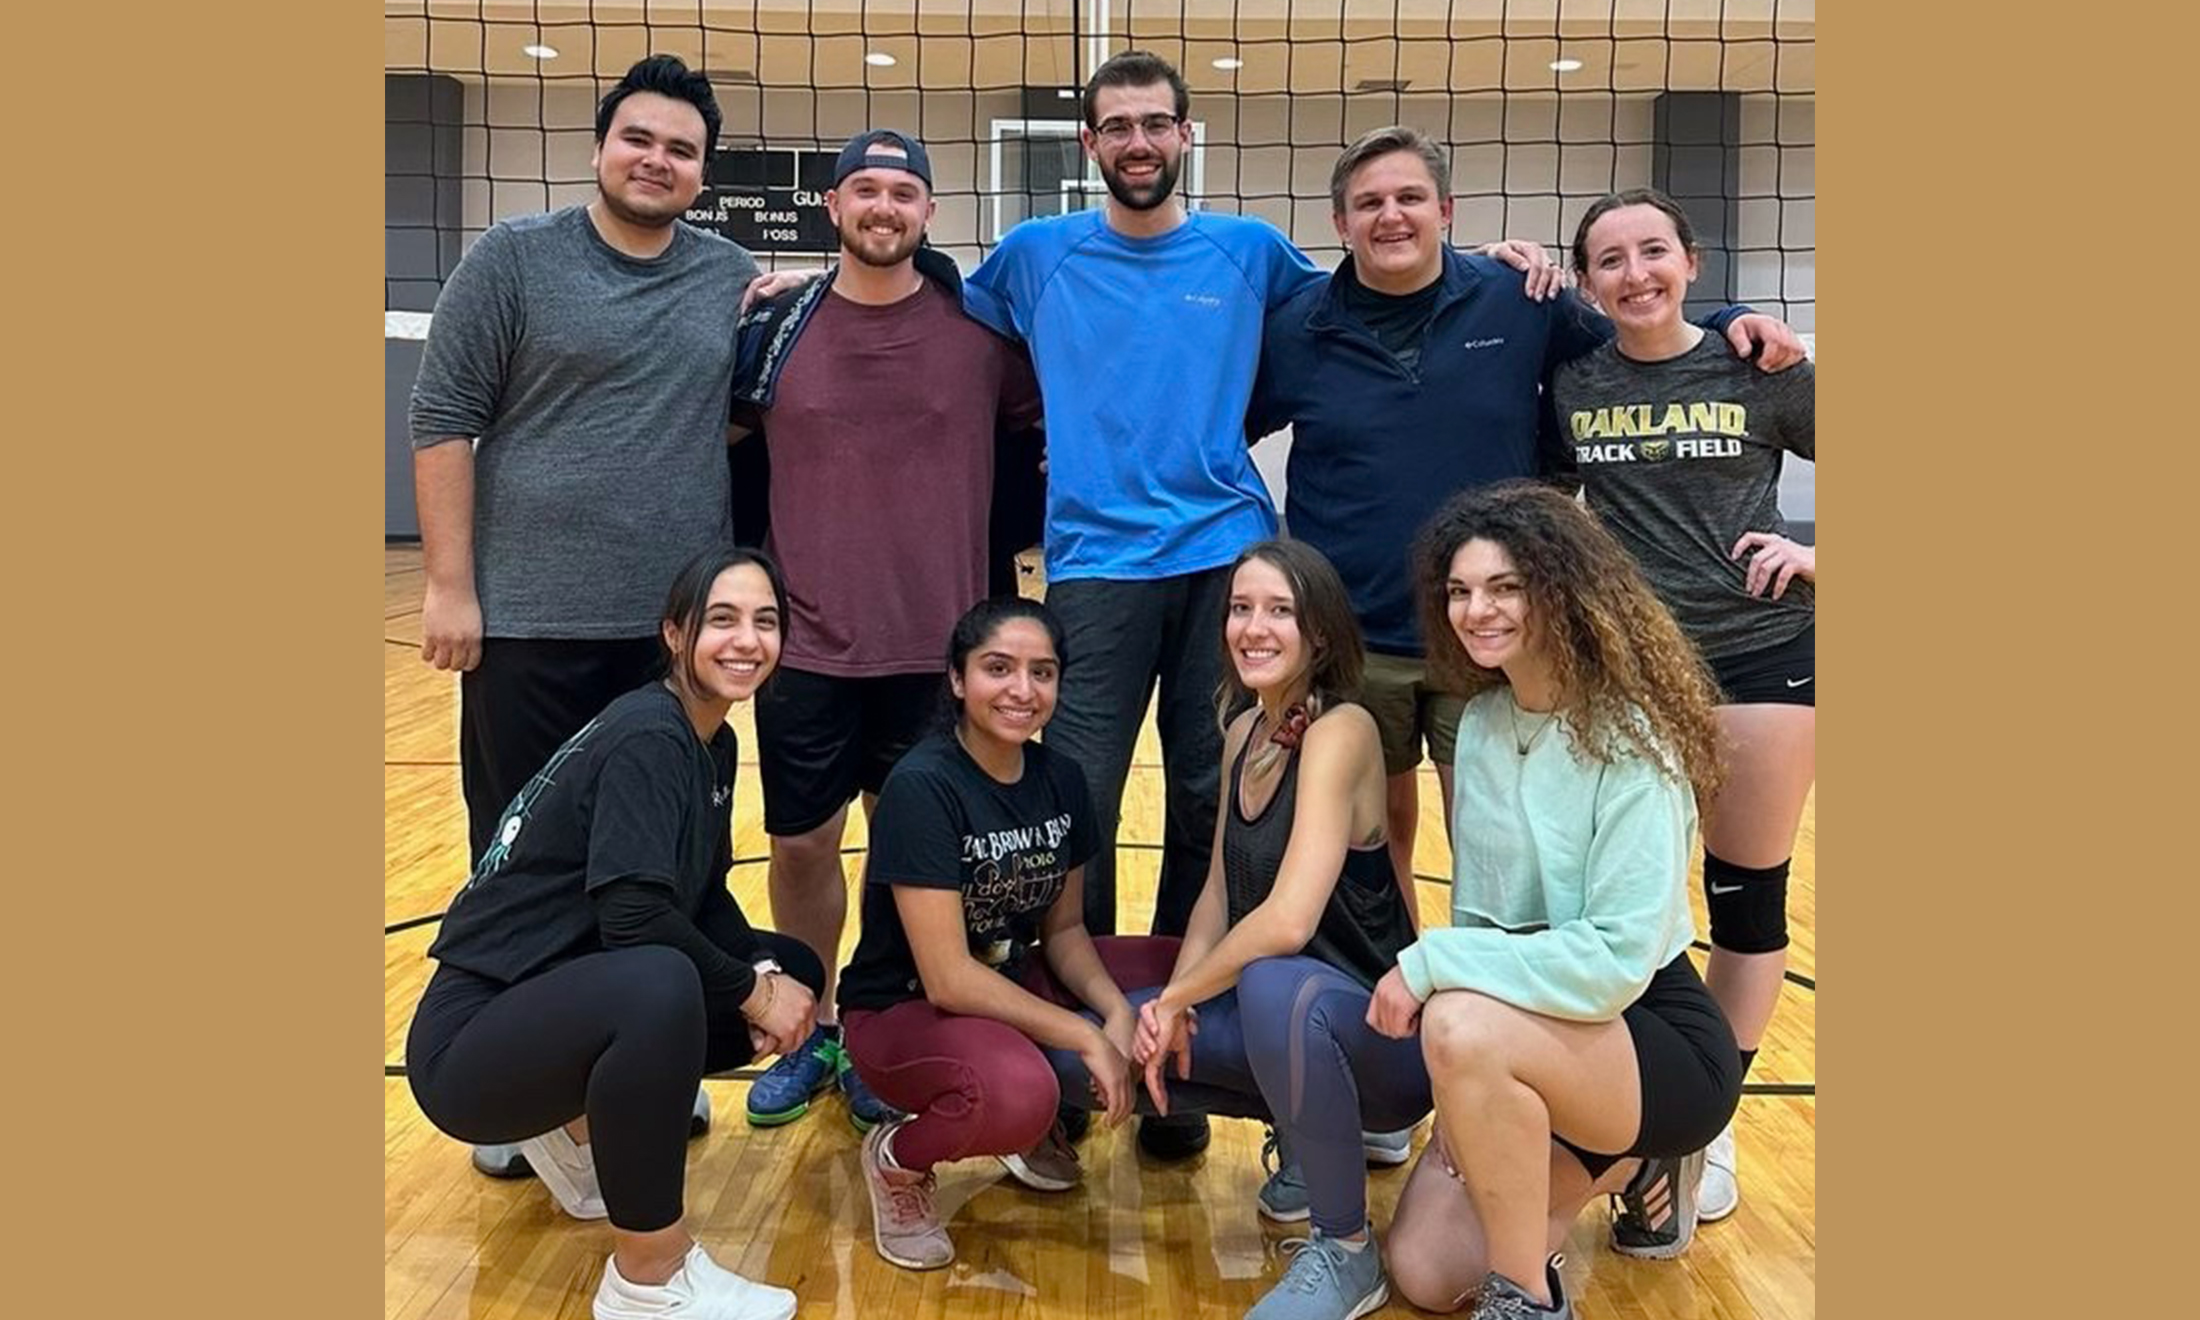 An image of one of OUWB's intramural sports teams